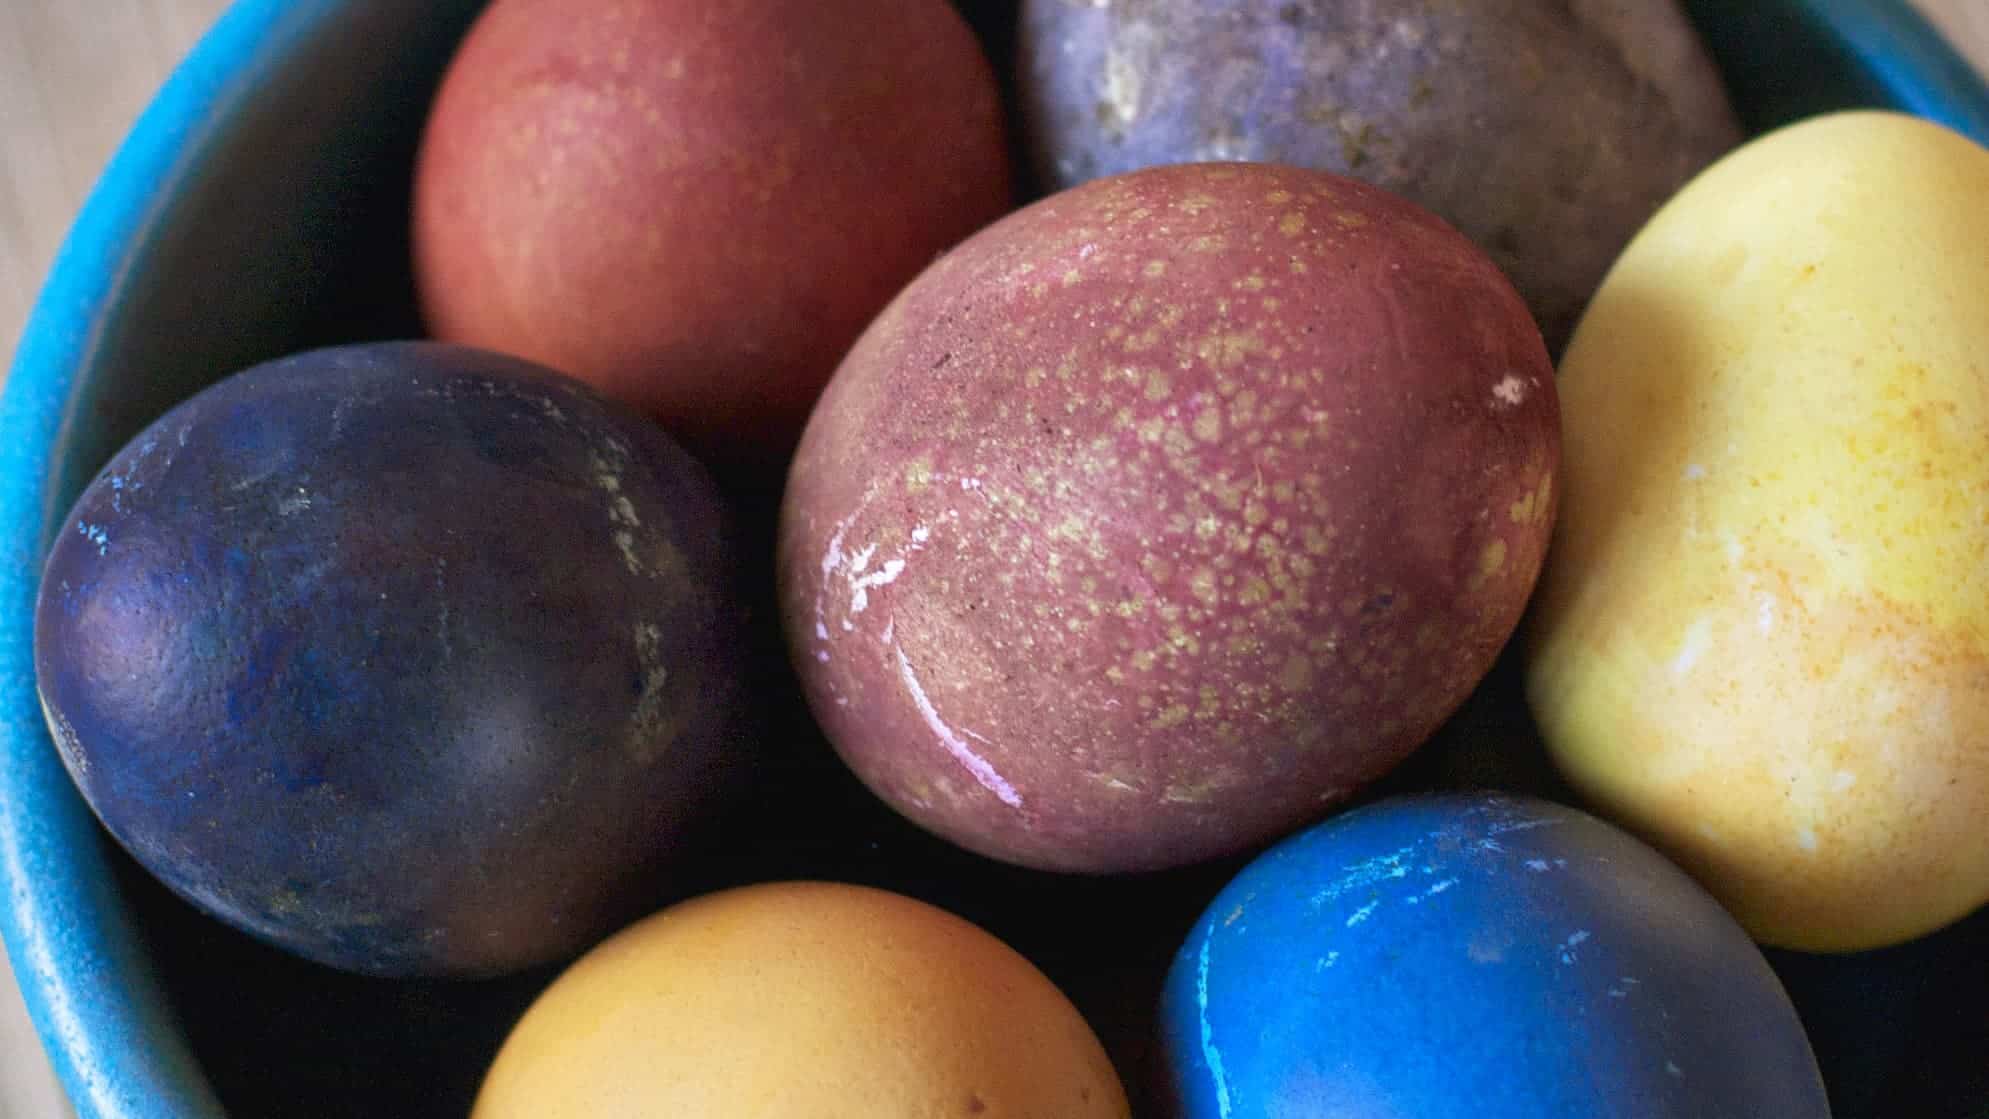 Eggs dyed with common kitchen ingredients show marbled patterns in red and blue and purple and gold. Creative Commons courtesy photo